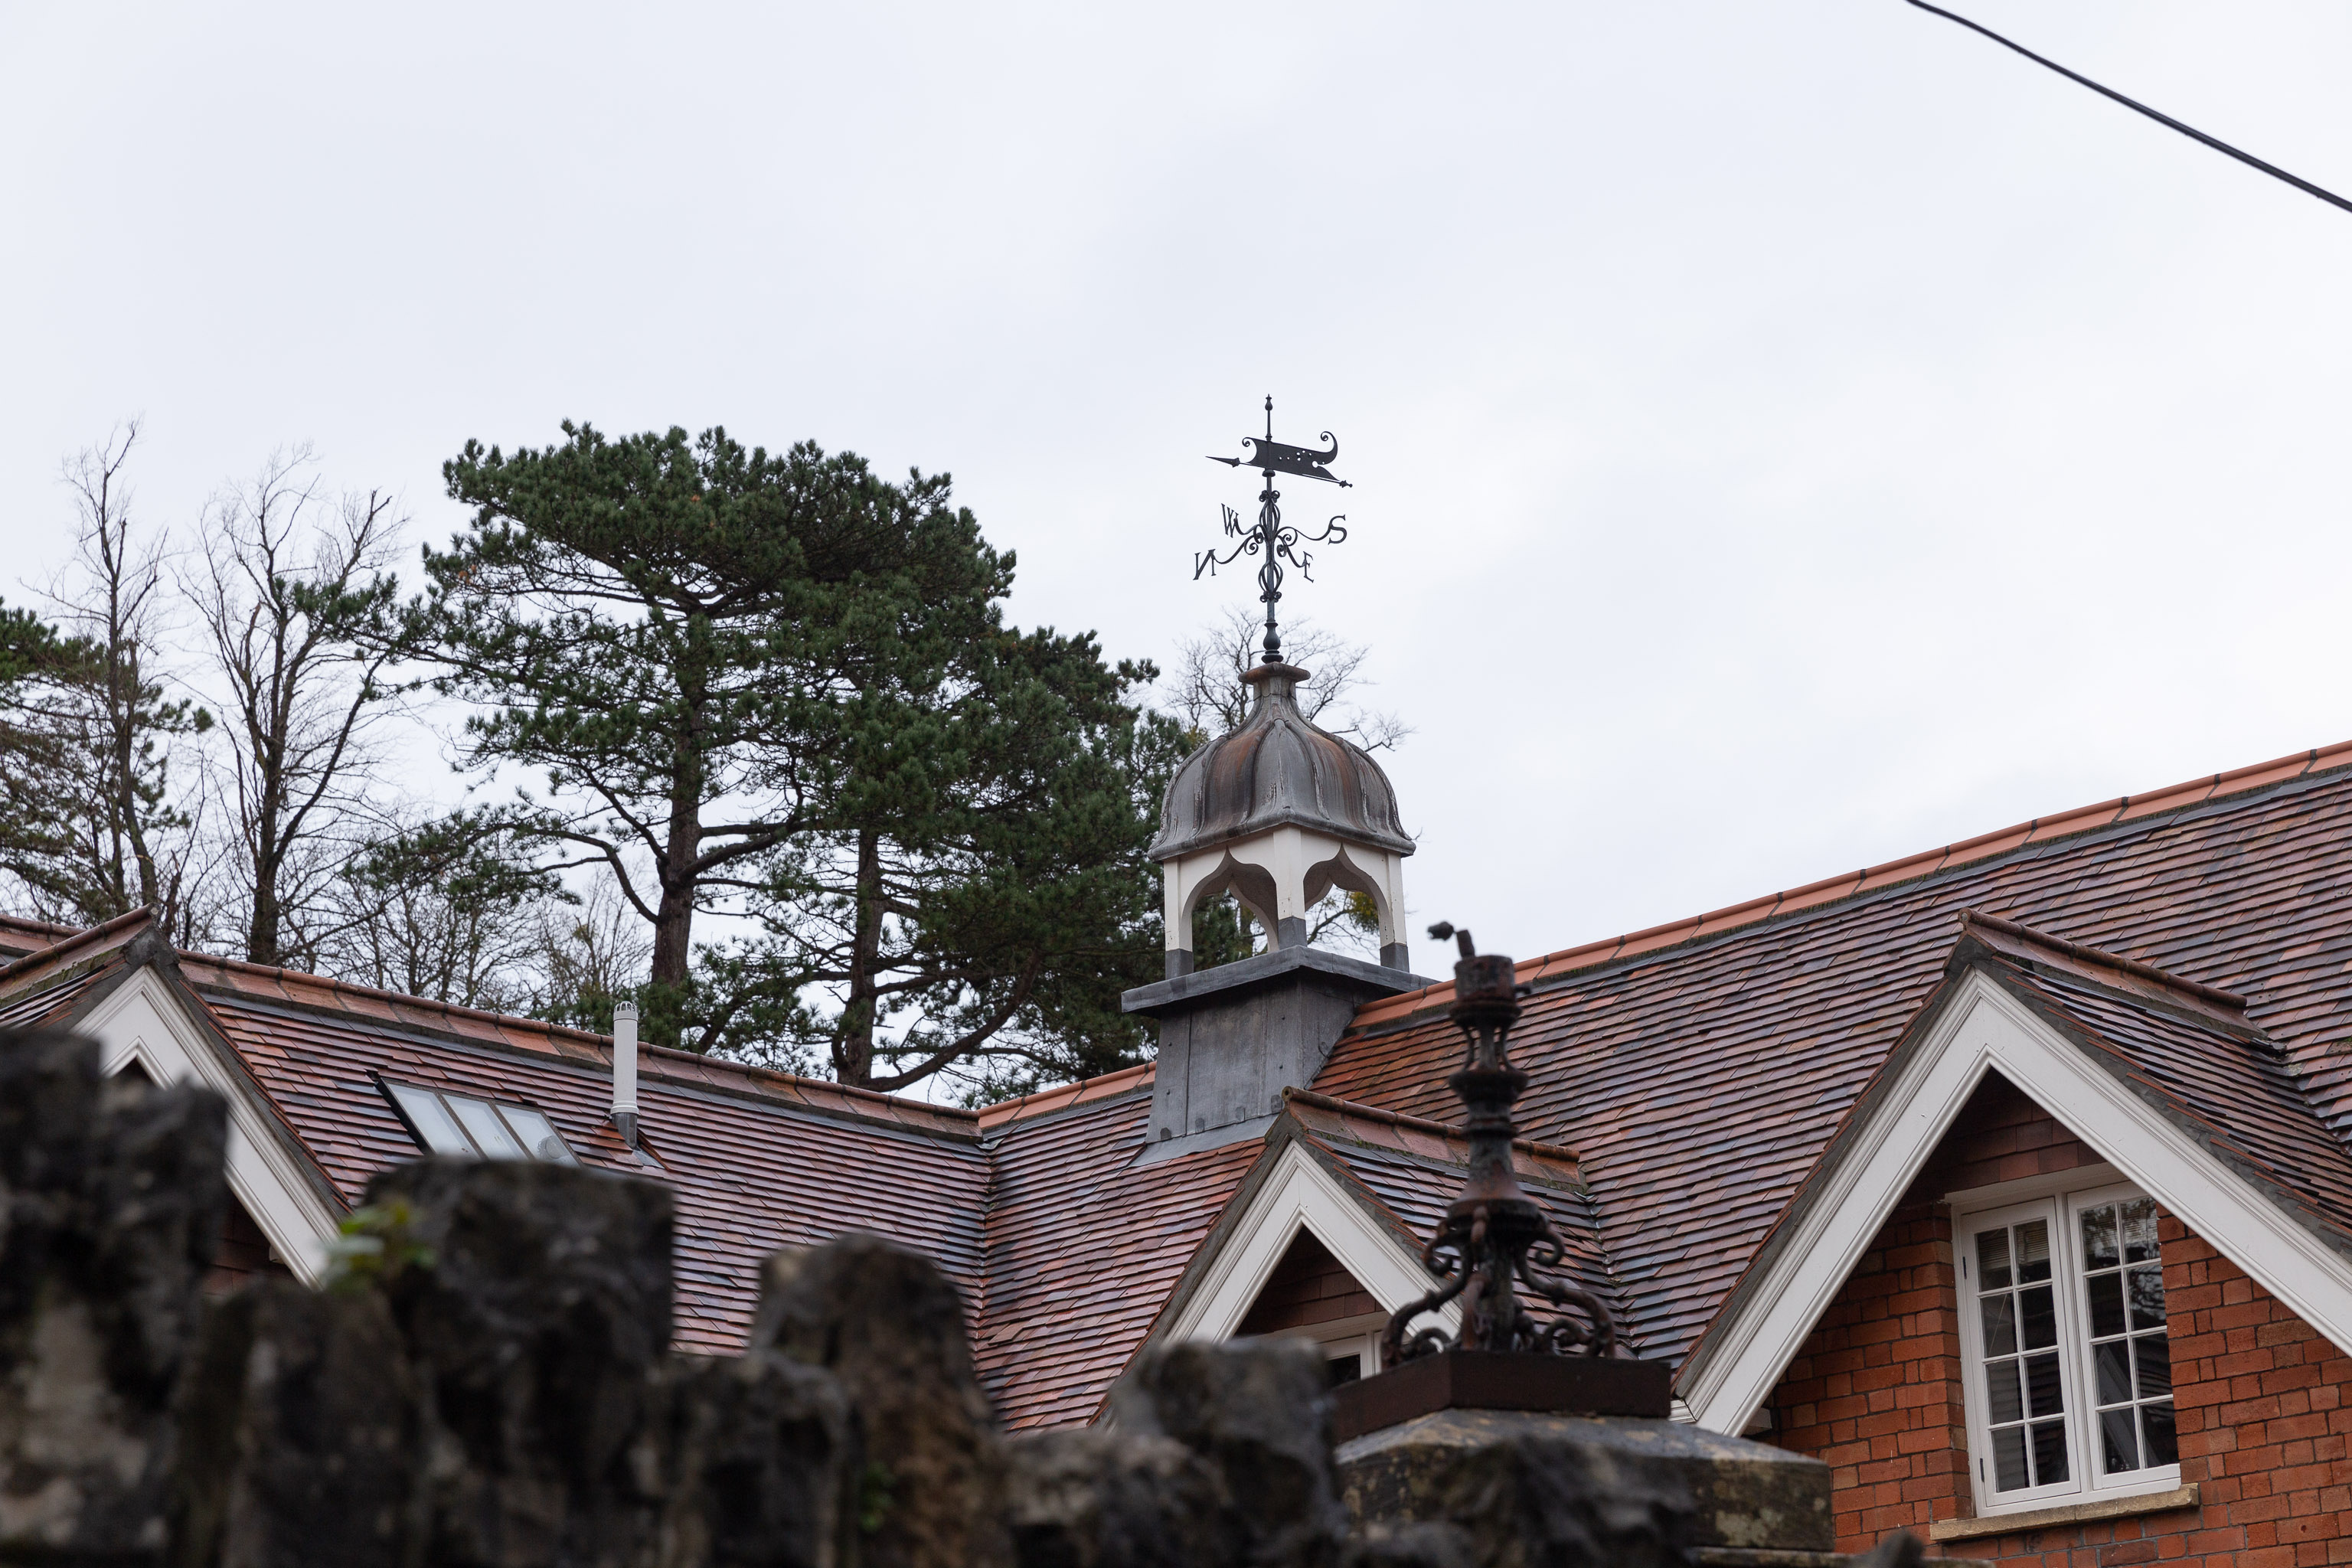 Cupola and Weathervane
Ornamentation on one of the houses on Burwalls Road
